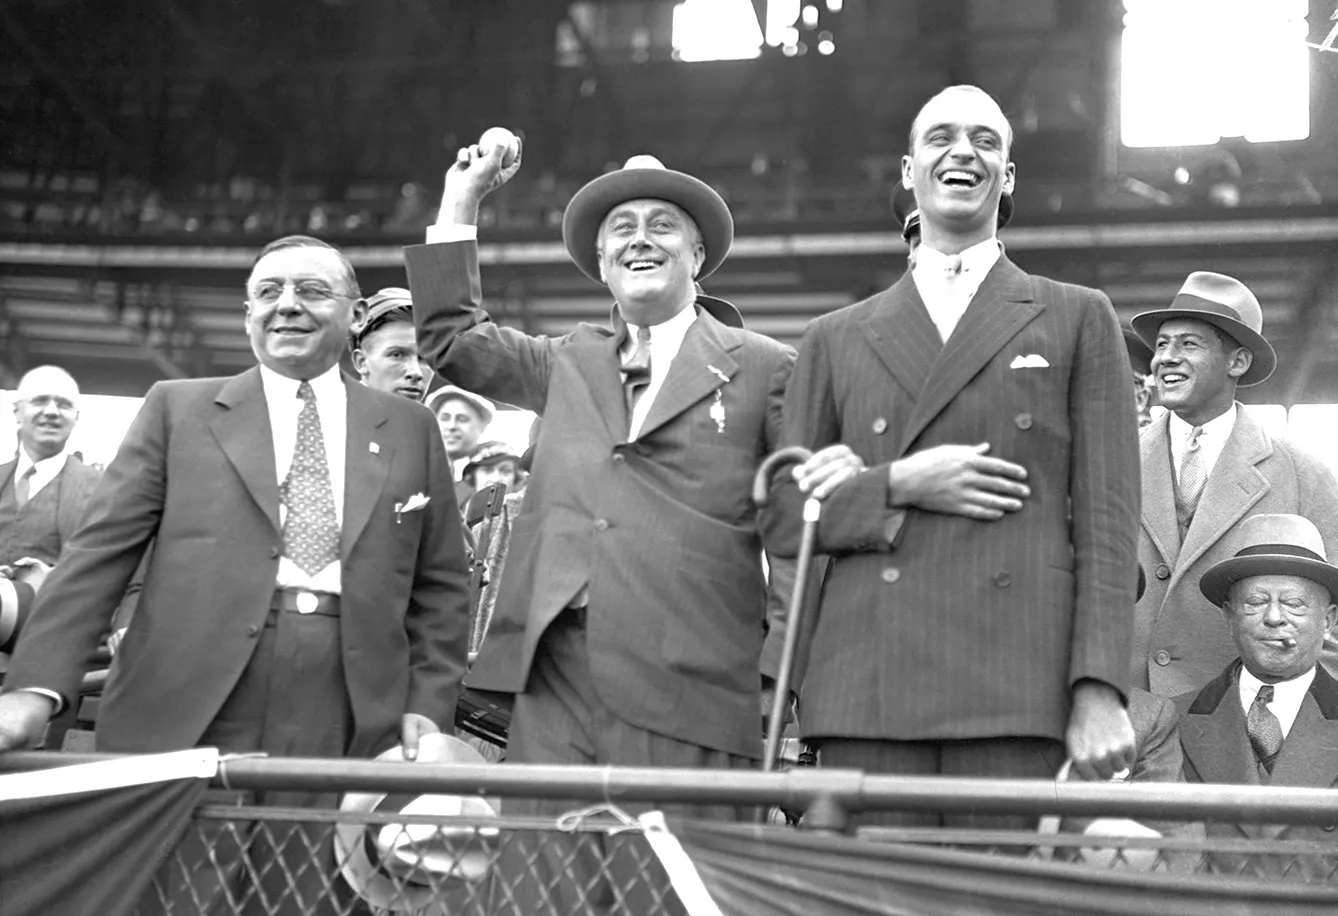 New York Governor and presidential candidate Franklin Roosevelt throws out a baseball at the last game of the 1932 World Series between the Chicago Cubs and the New York Yankees. To the right is his son James. To the left is Chicago Mayor Anton Cermak.